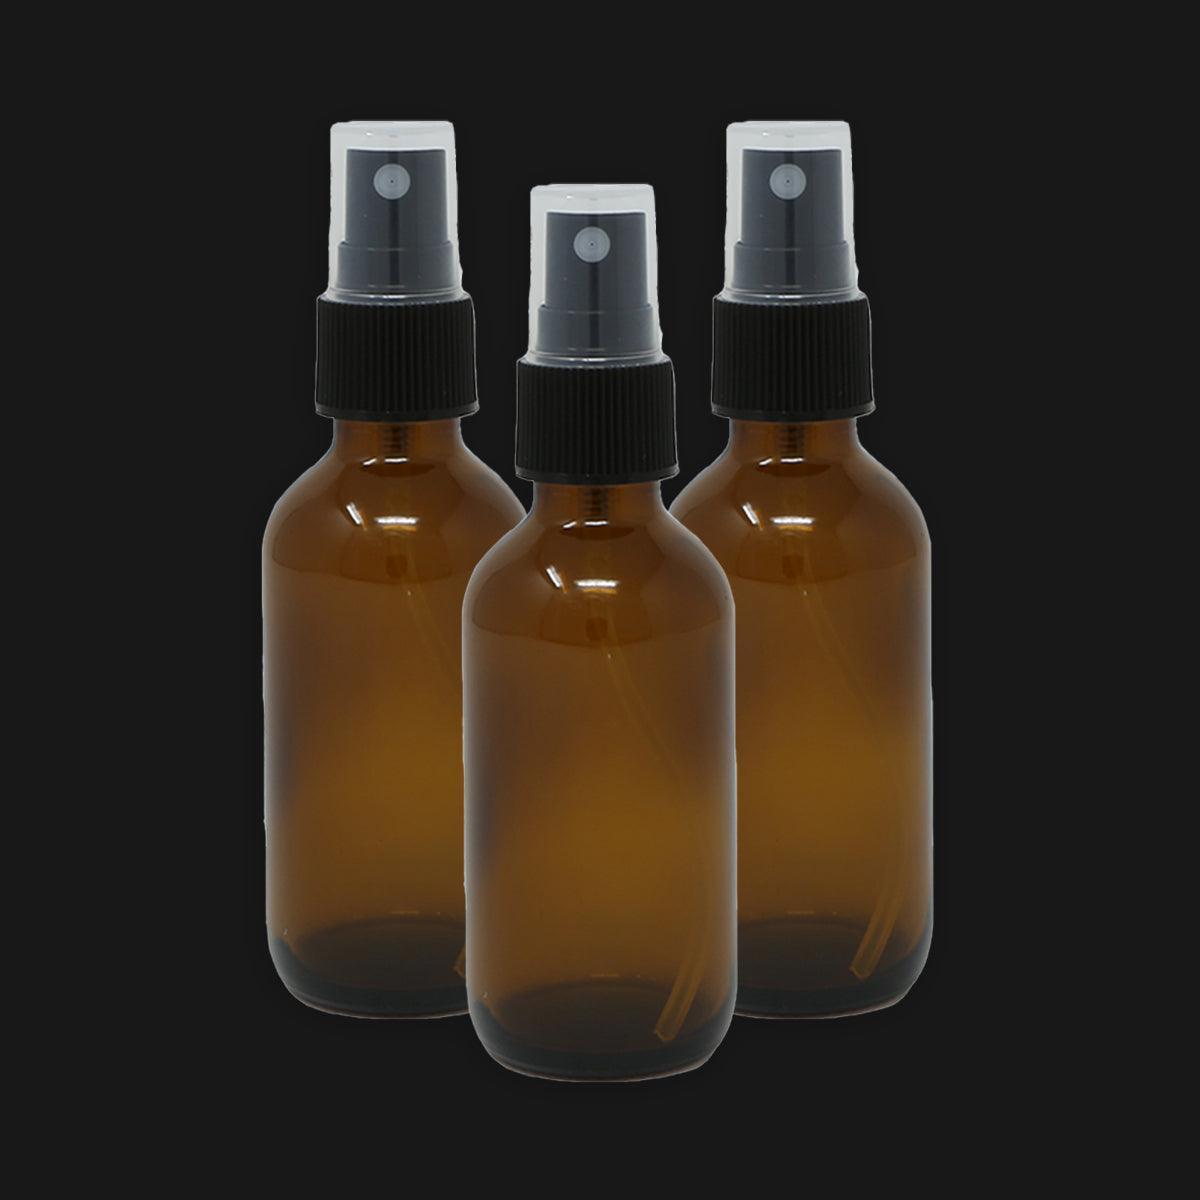 60ml amber glass bottle with mister (3 pack) - local - letsbelocal.ca